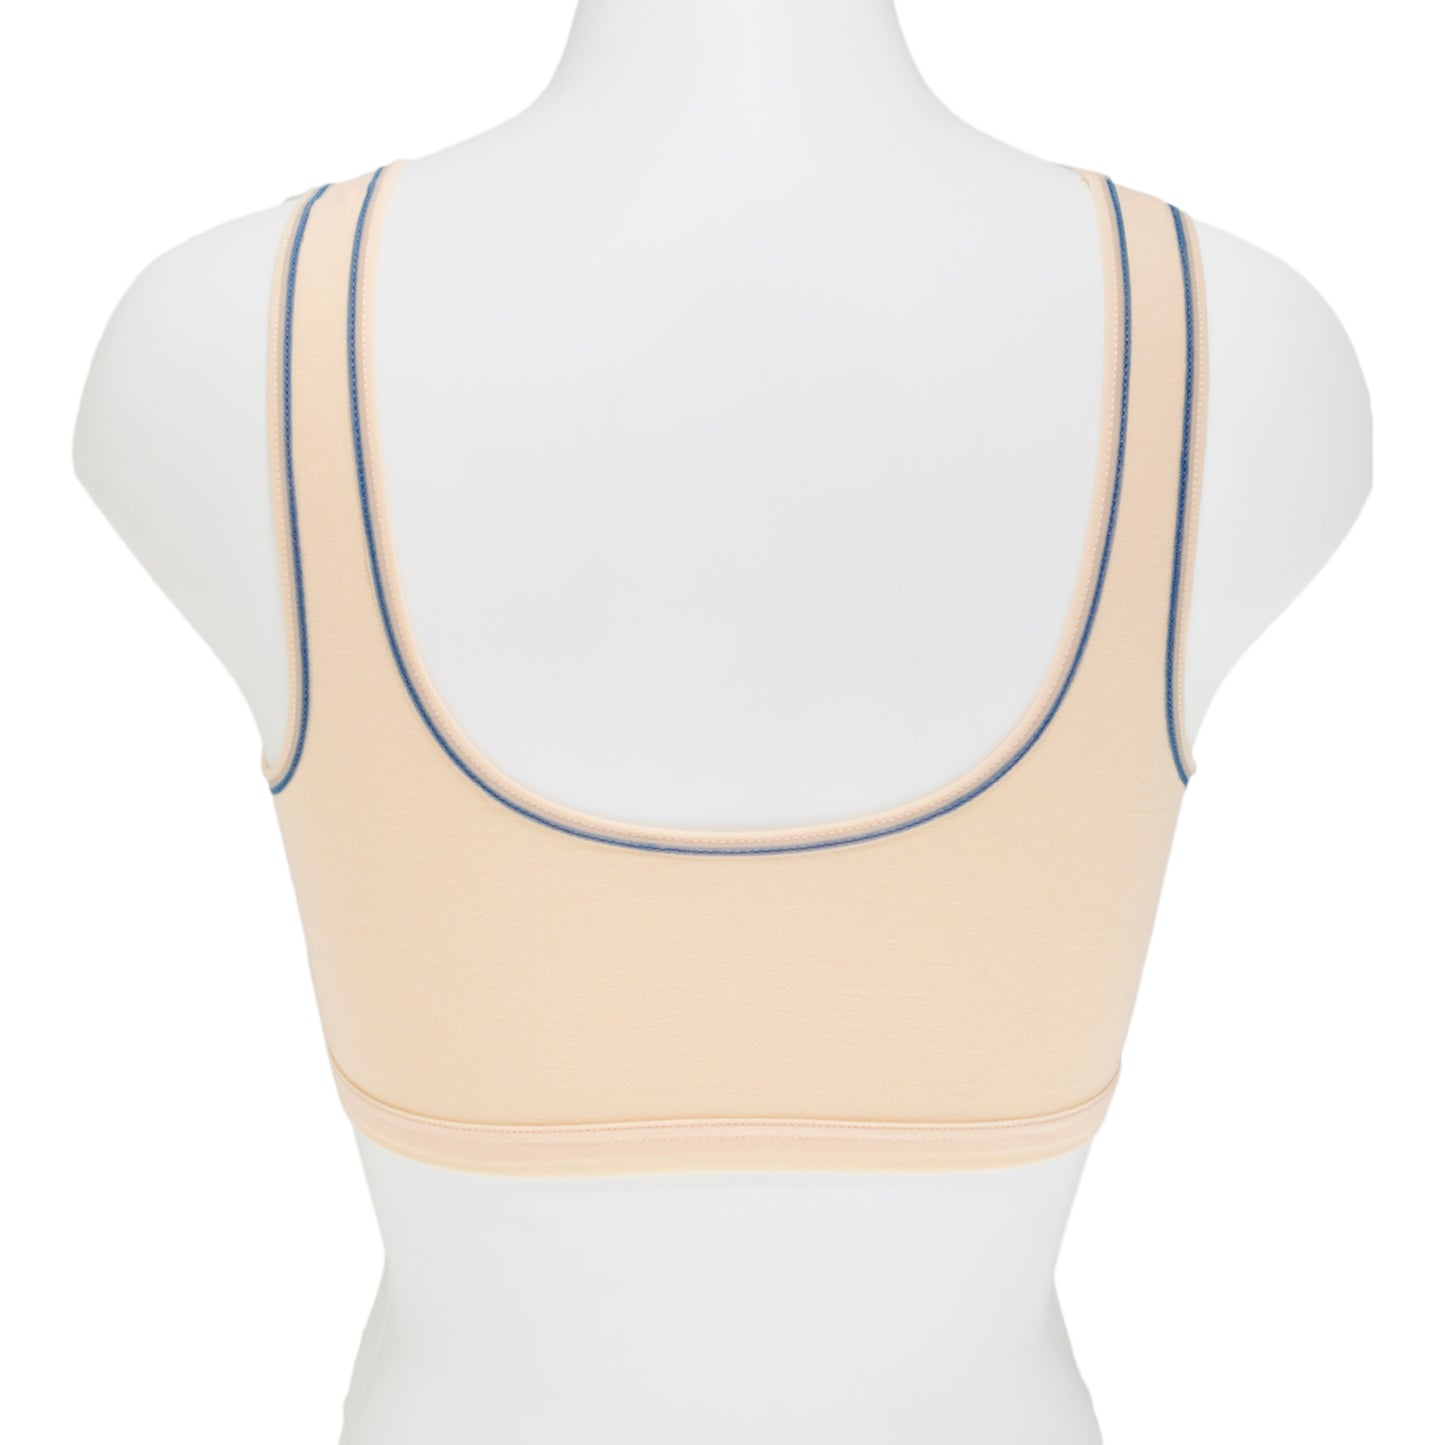 Angelina Girl's Wire-free Cotton Training Bra (6-Pack), #B995A